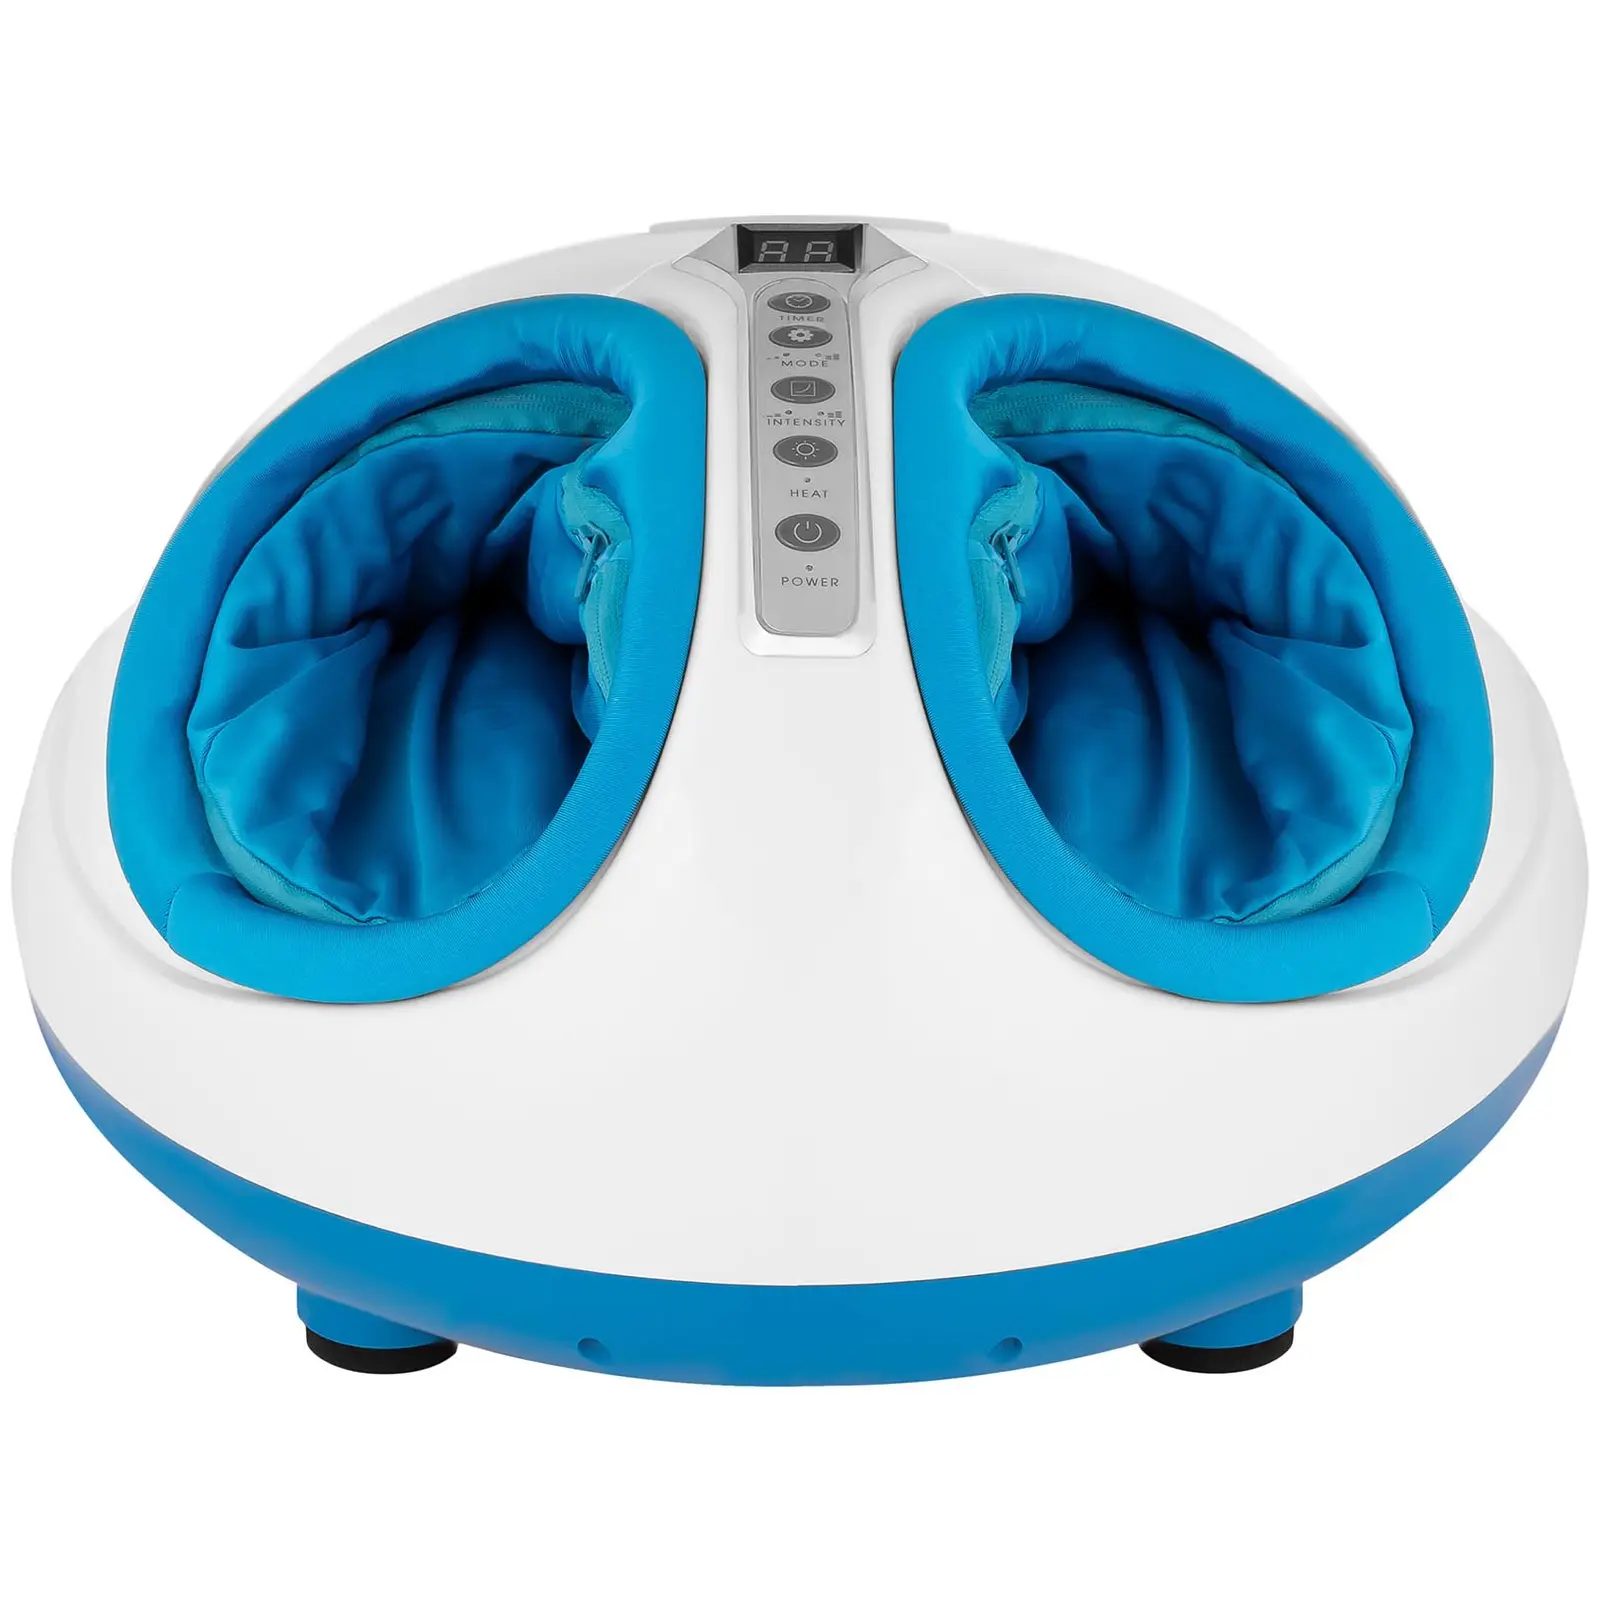 Electric Foot Massager - 3 massage programs - heating function